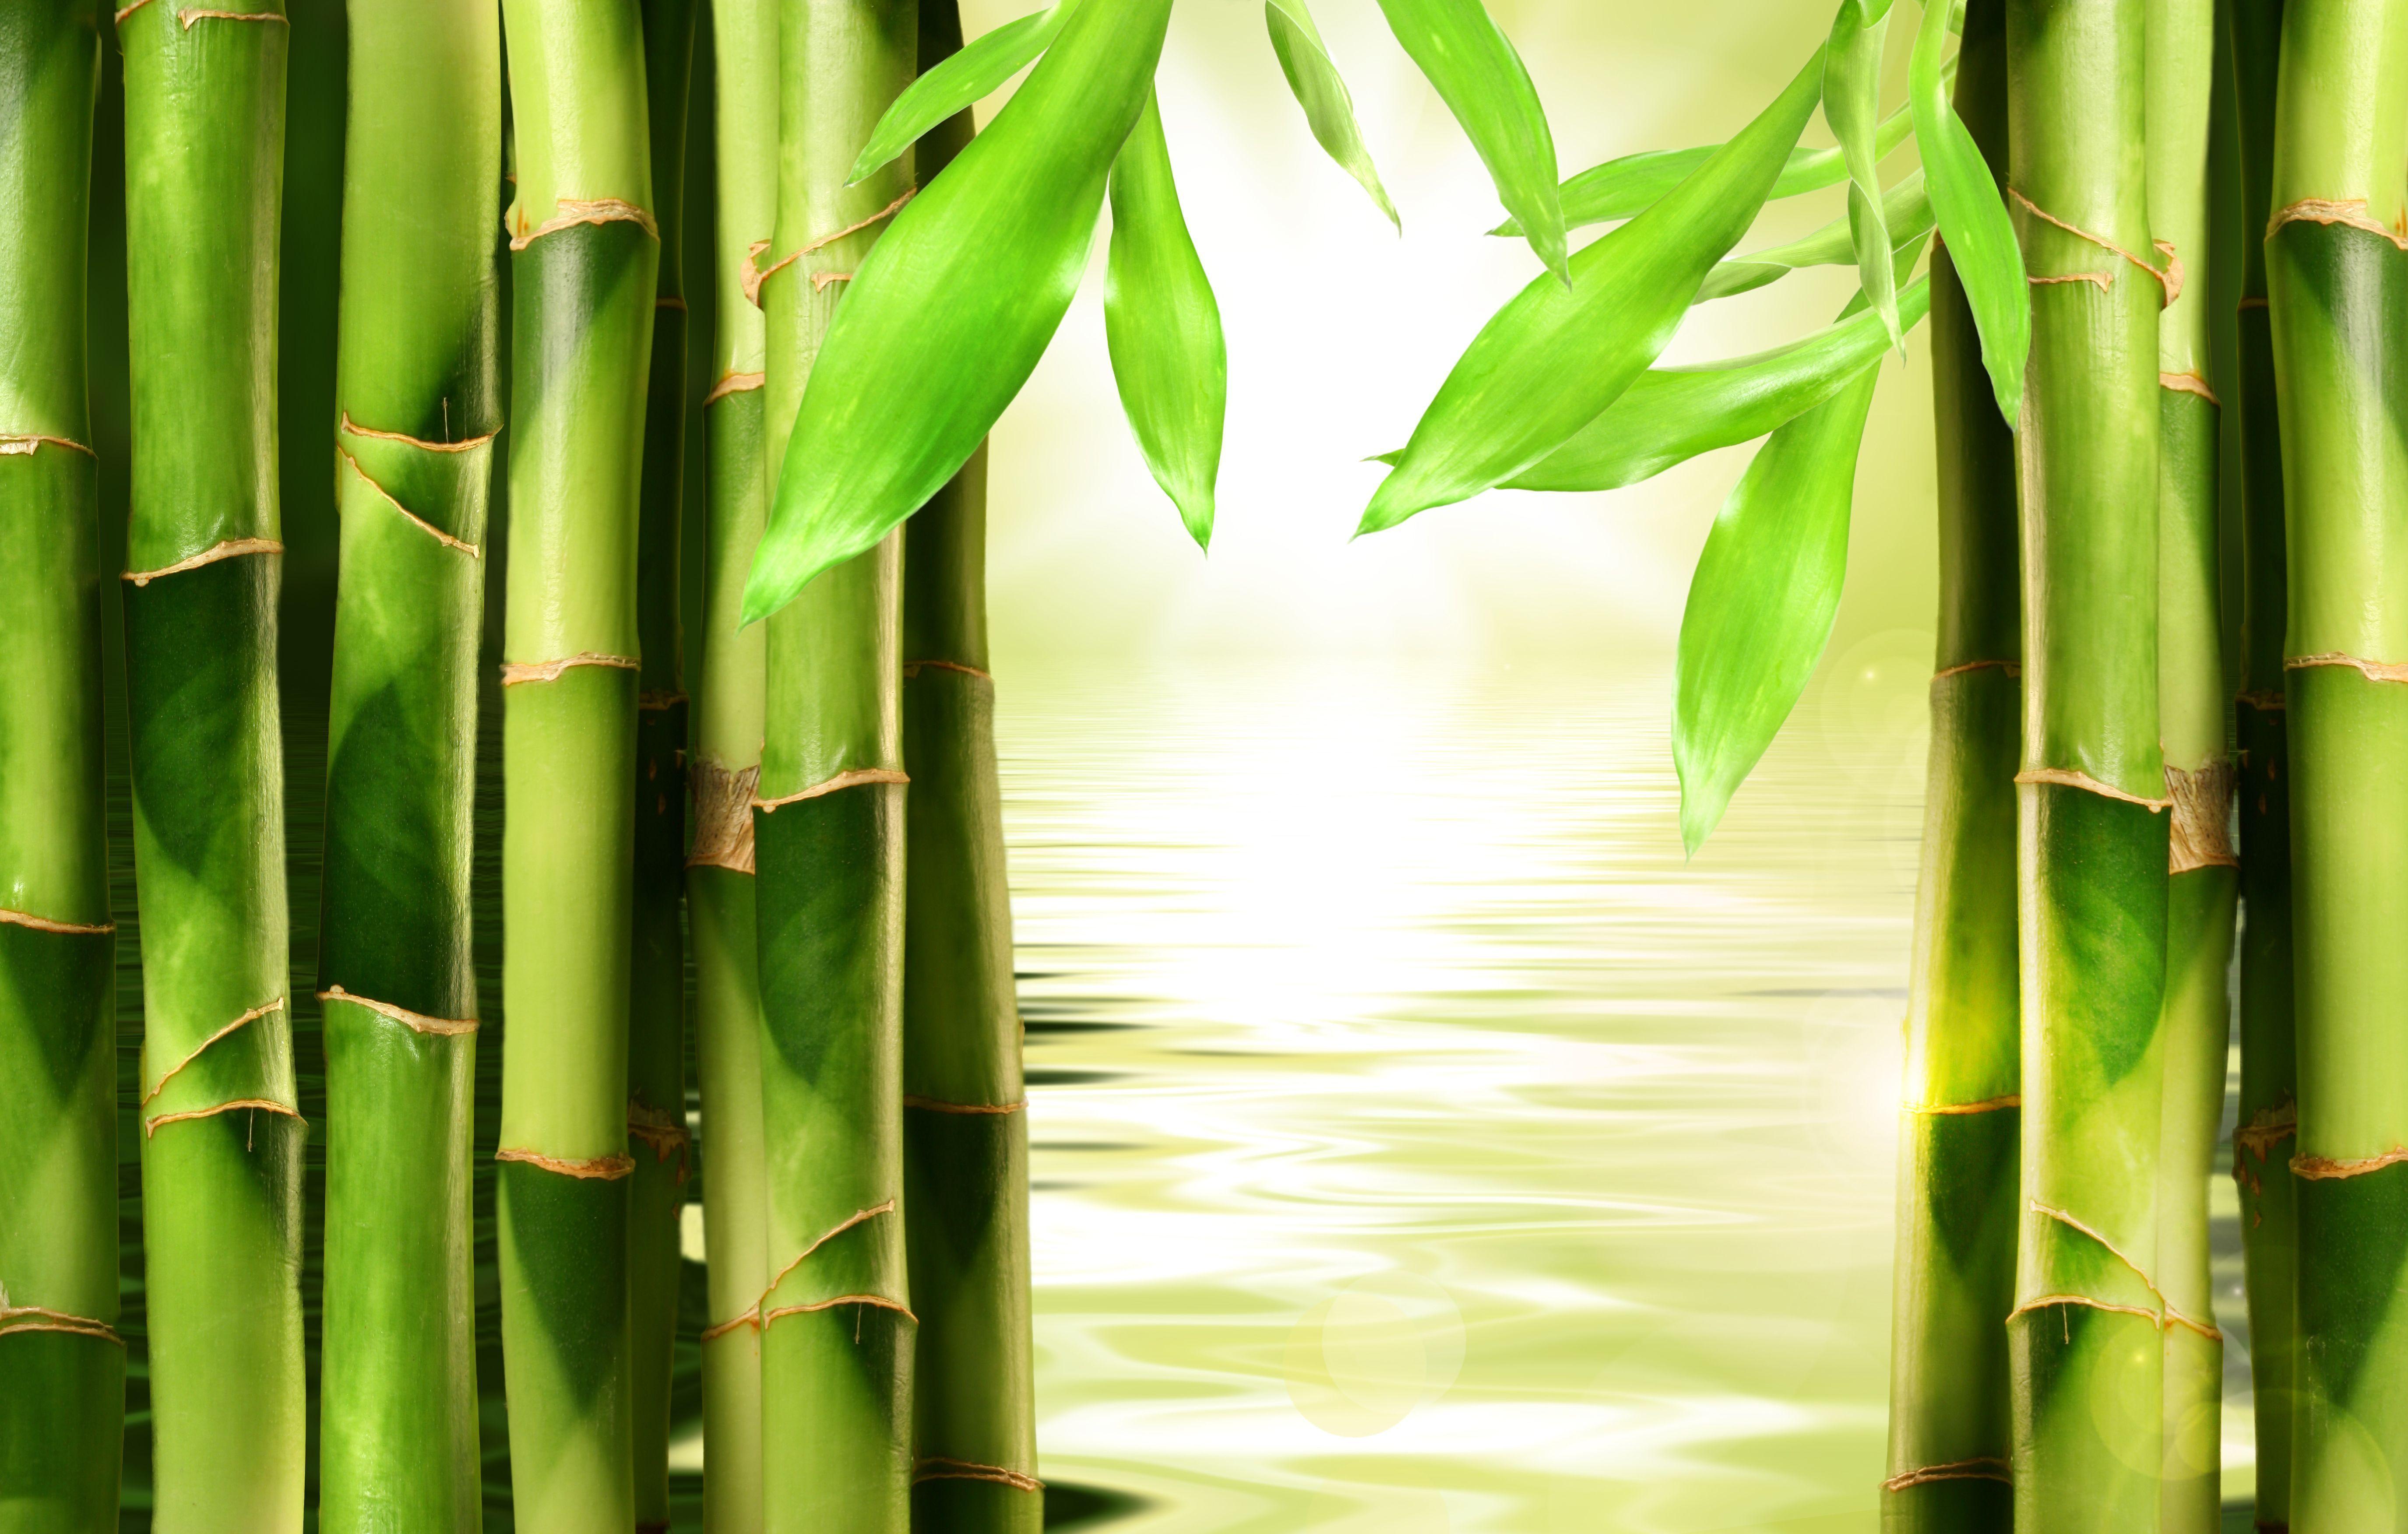  Bamboo  Wallpapers  Top Free Bamboo  Backgrounds 